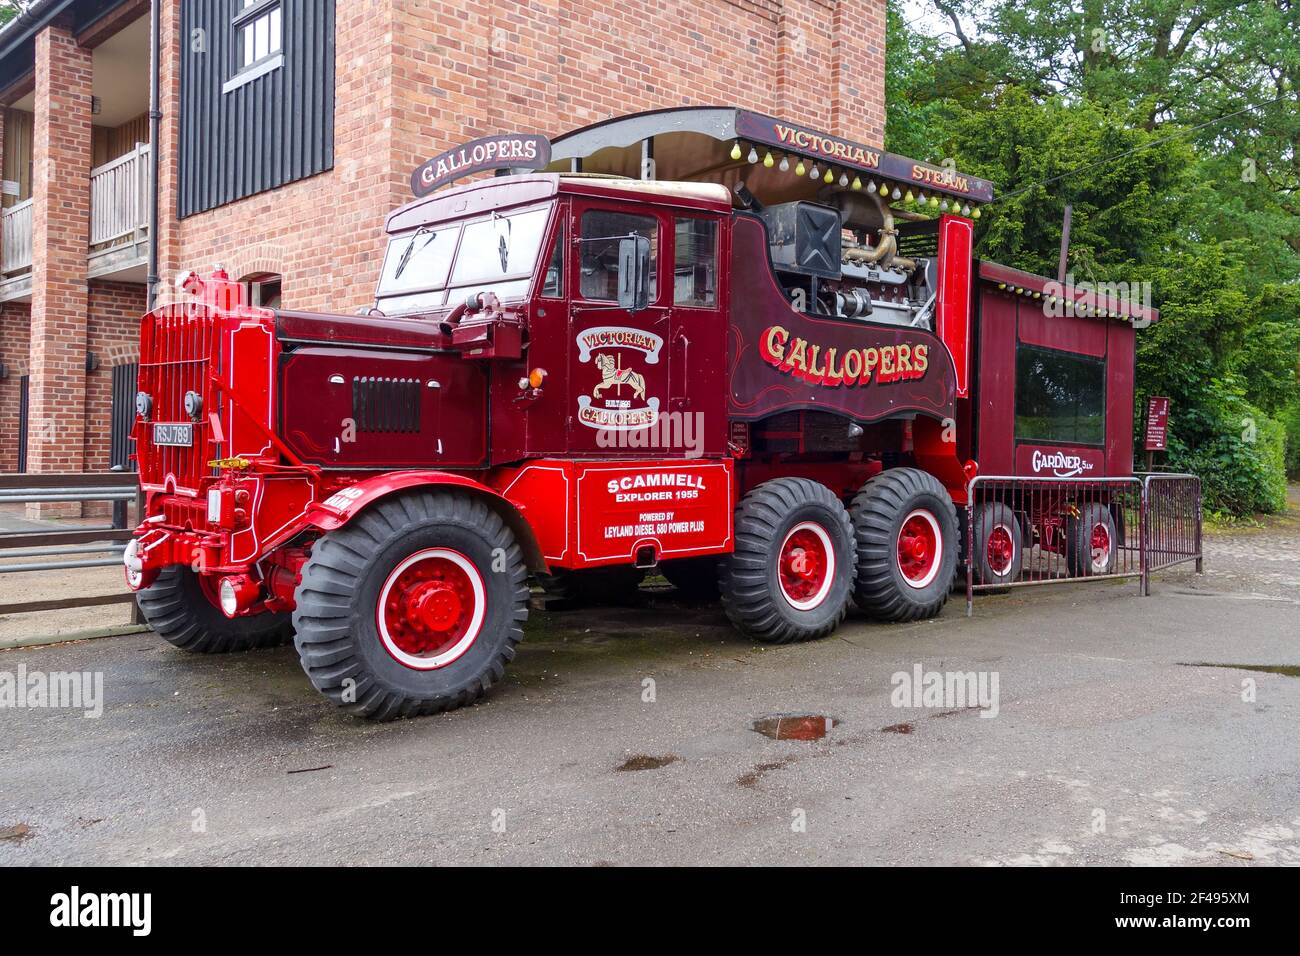 1955 Scammell Explorer truck housing a generator for the Victorian steam gallopers fairground ride, Tatton Park, Cheshire, England, UK Stock Photo